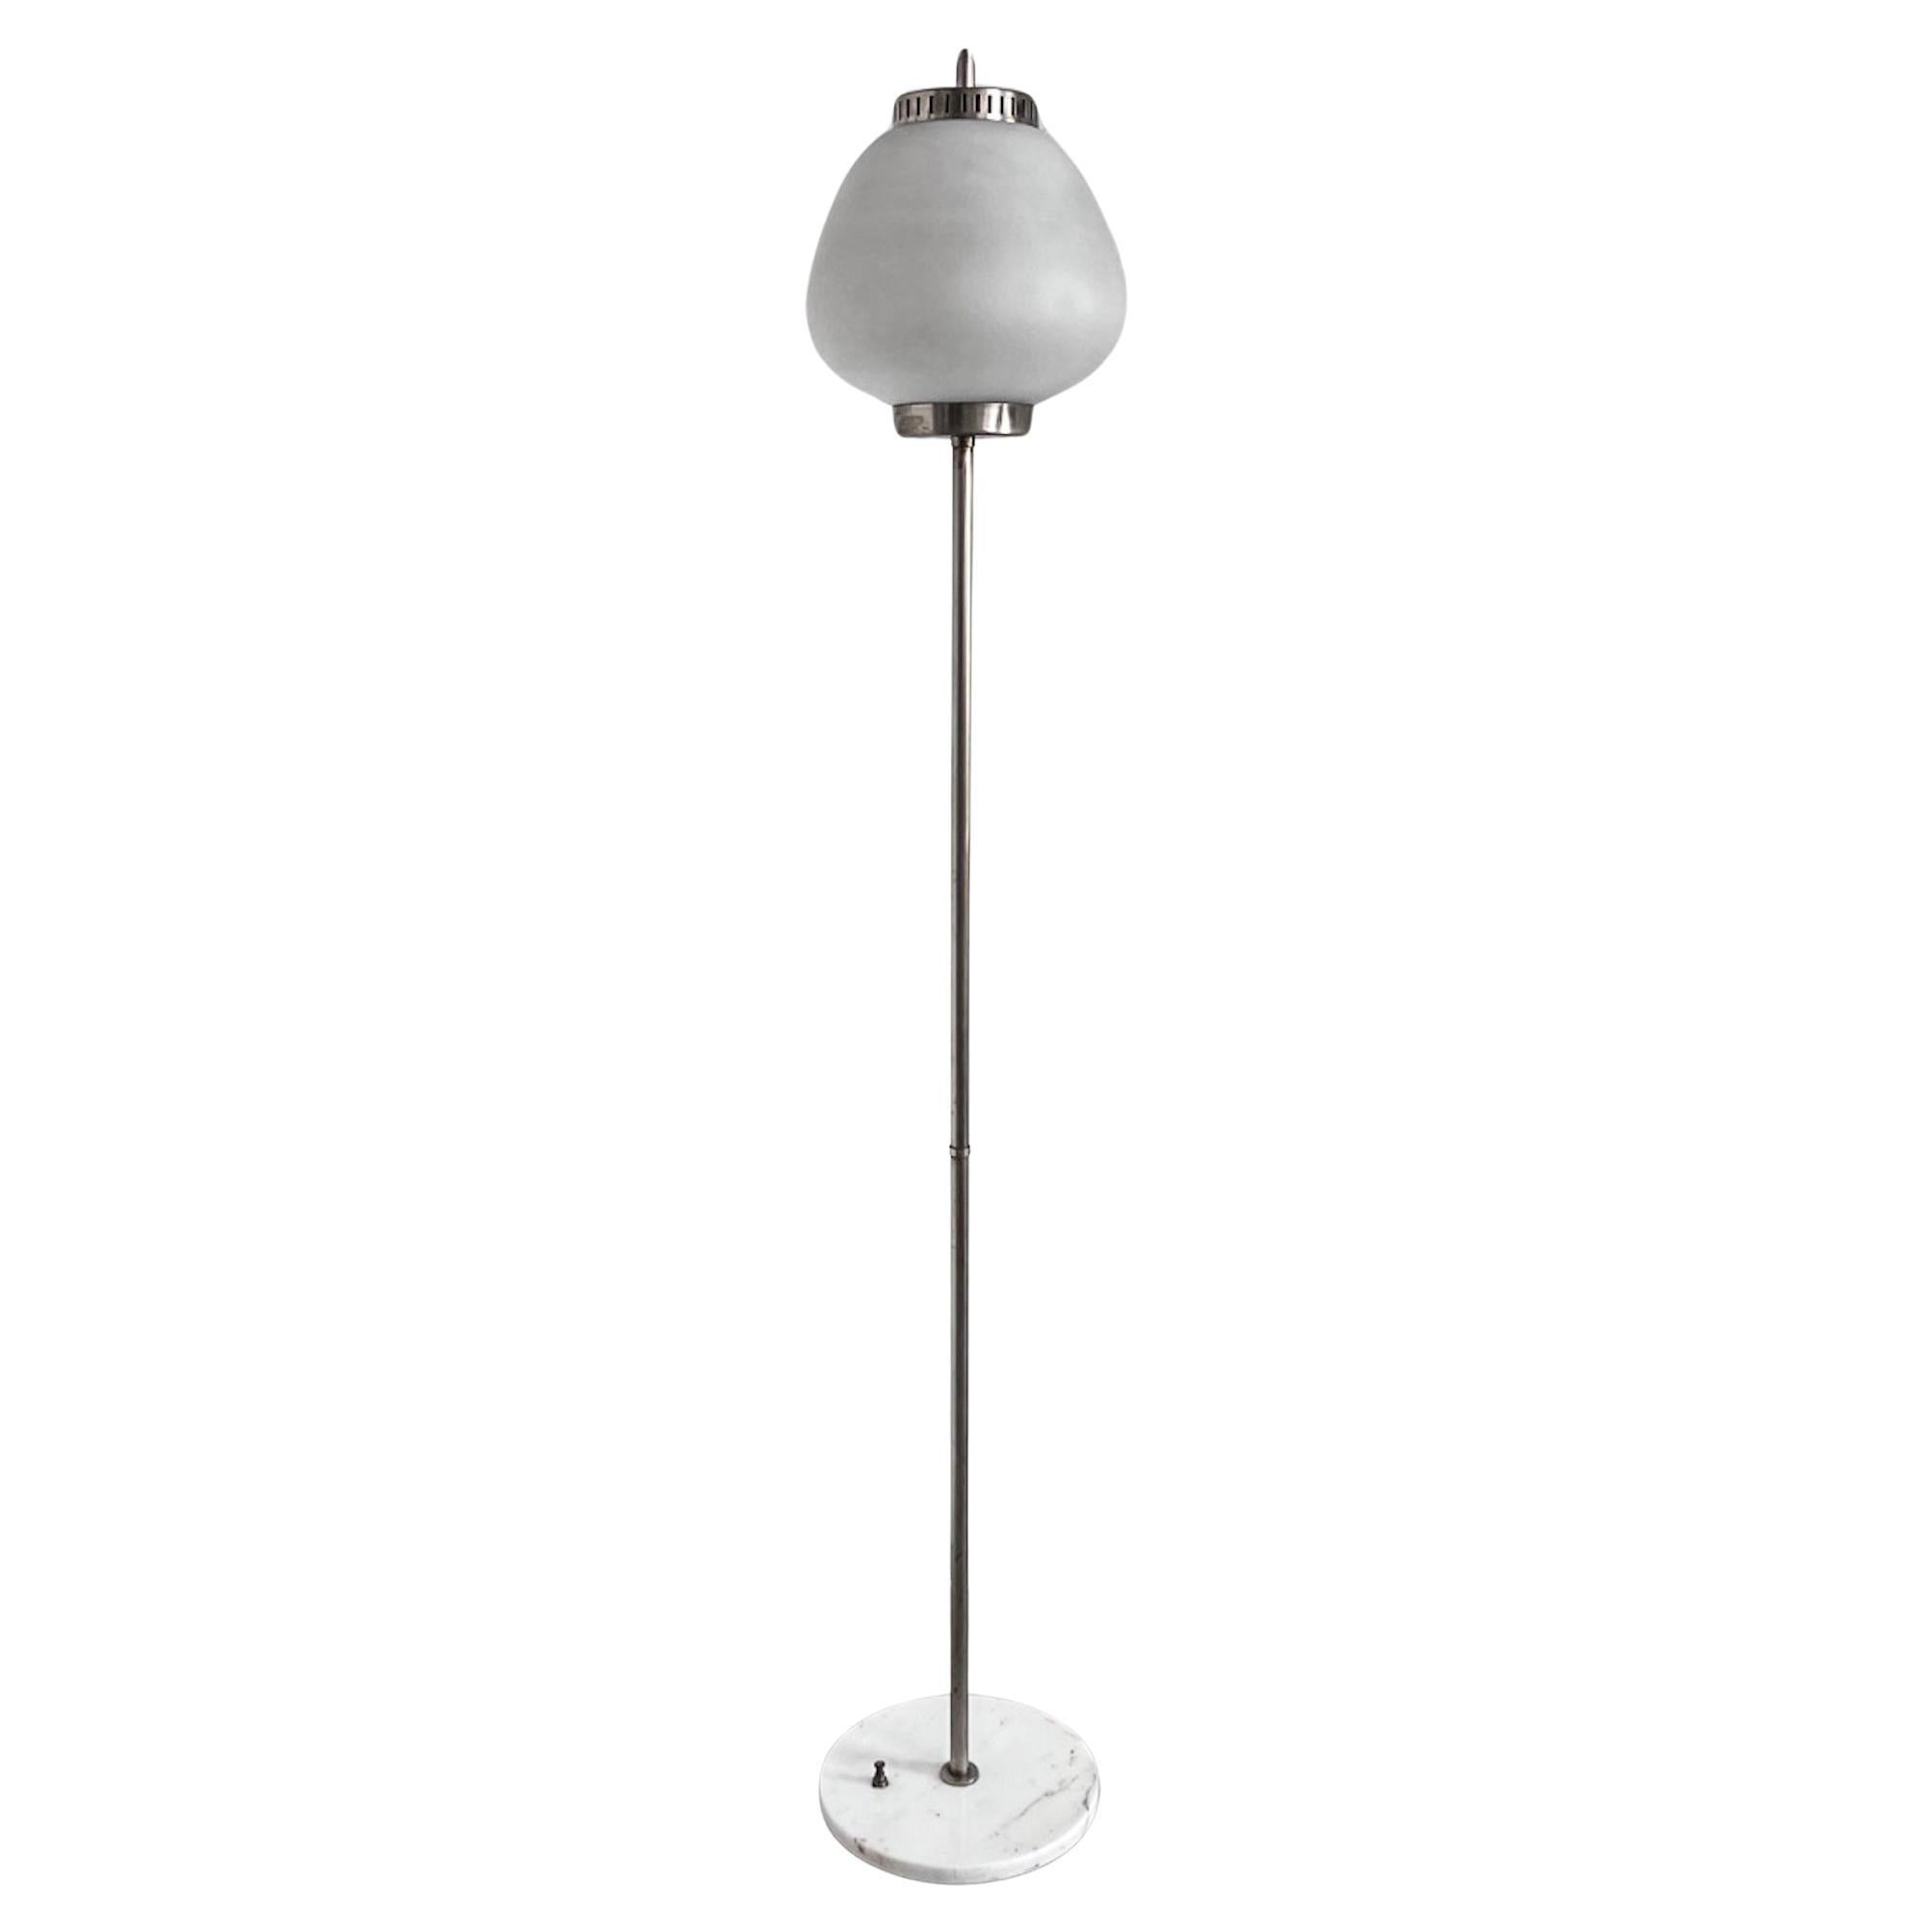 Stilnovo Floor Lamp in Metal, Marble and Opaline Glass, 1950s Rare Decorative For Sale